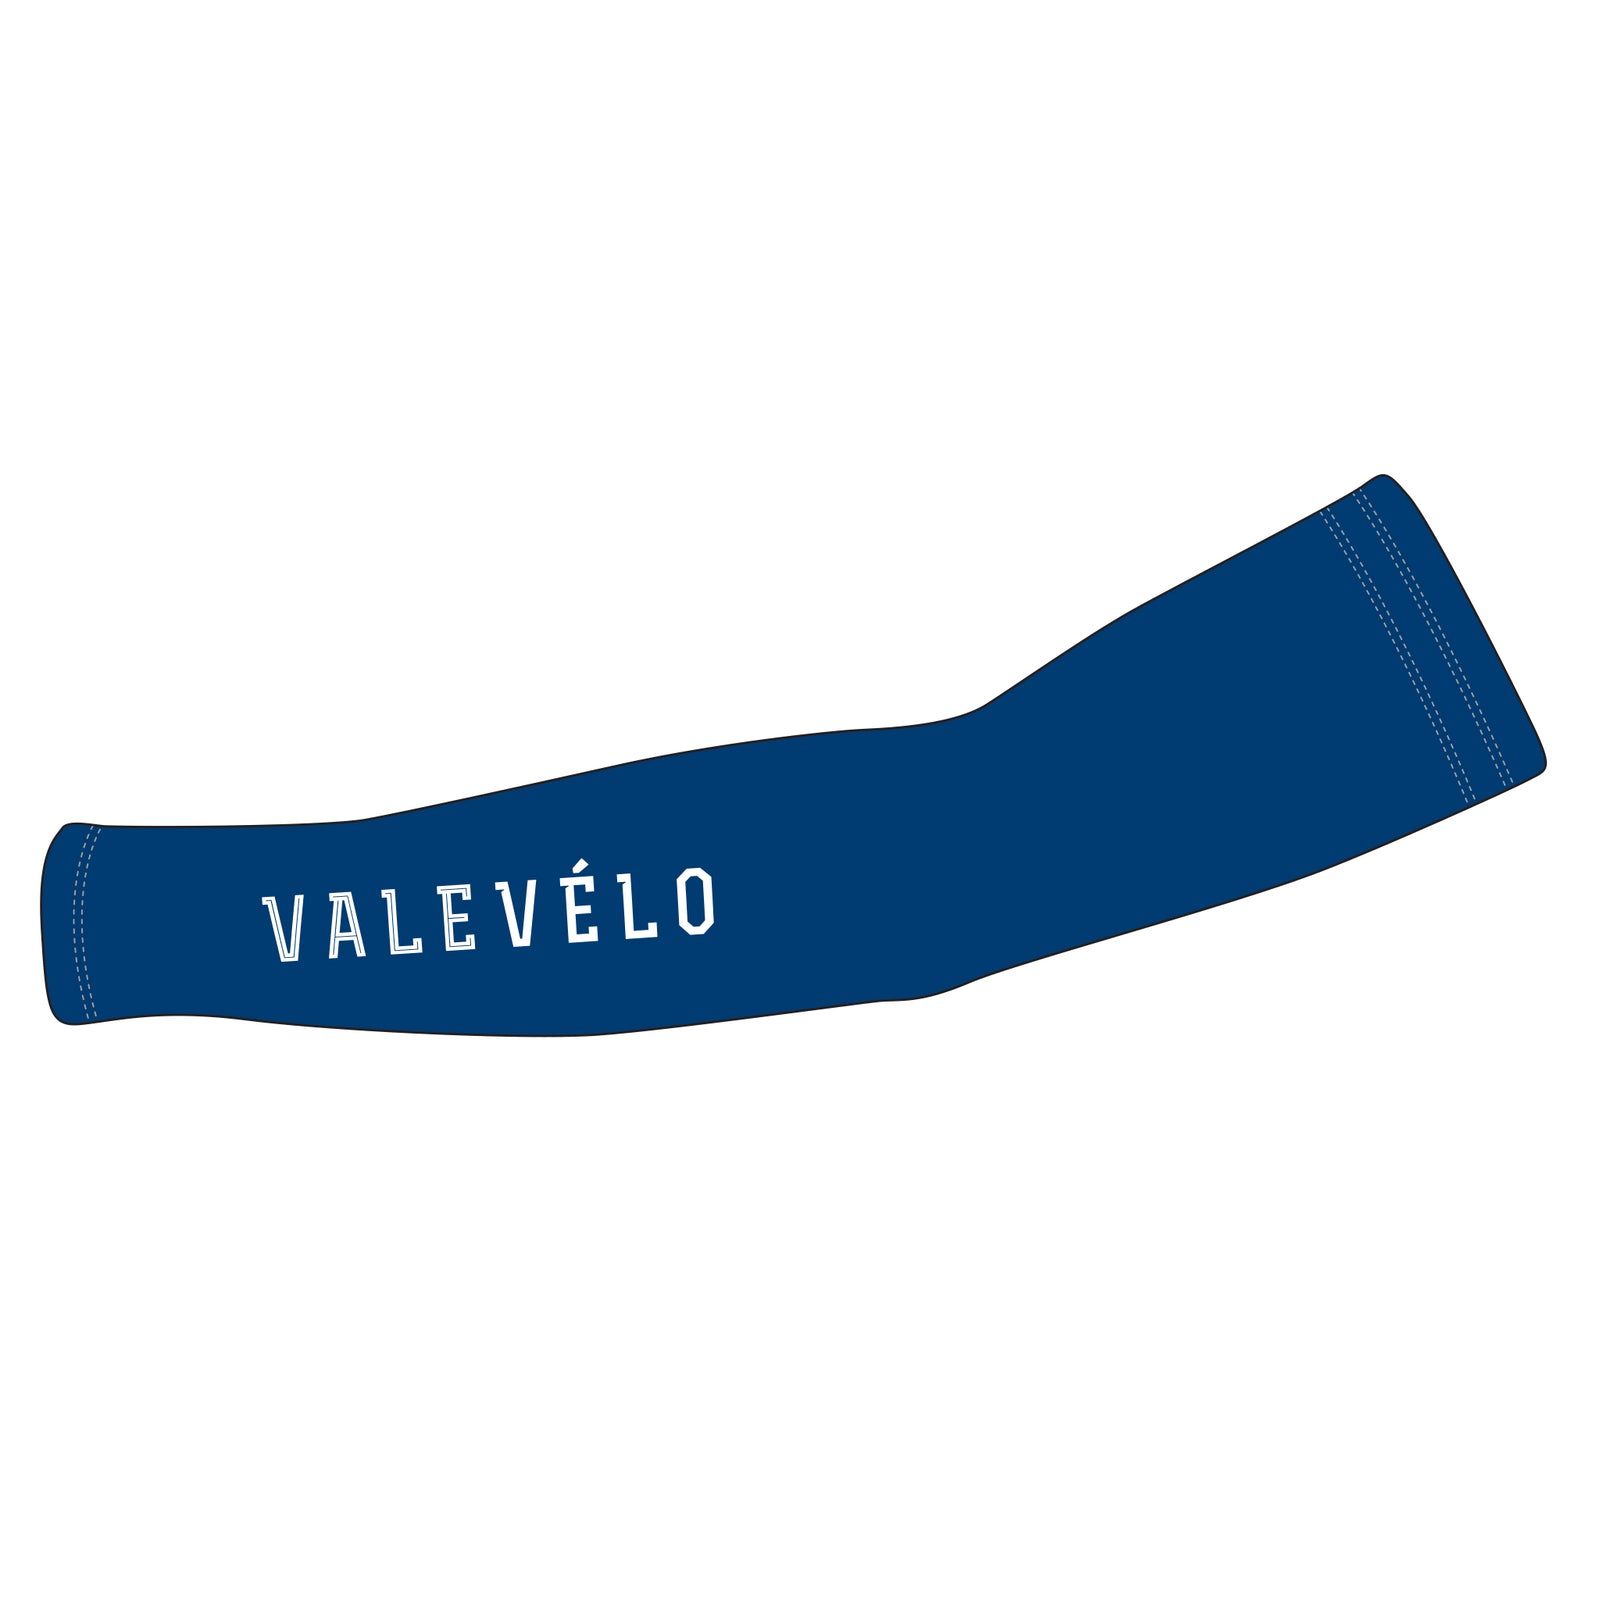 VALEVELO UNISEX SILVER Thermal Cycling Arm Warmers, BLUE